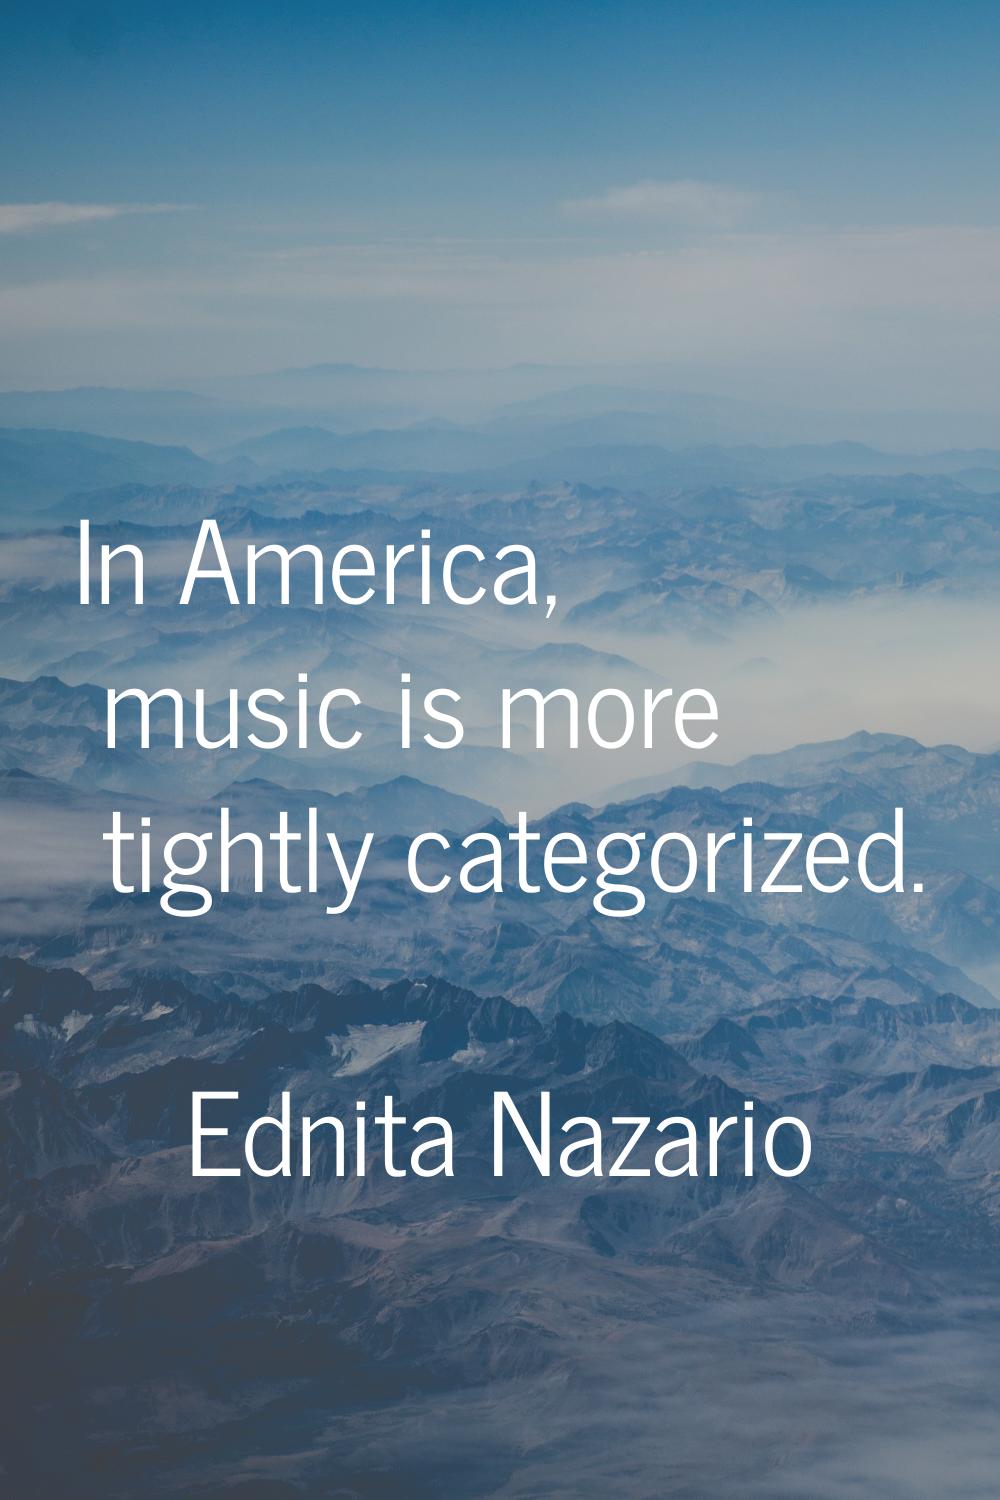 In America, music is more tightly categorized.